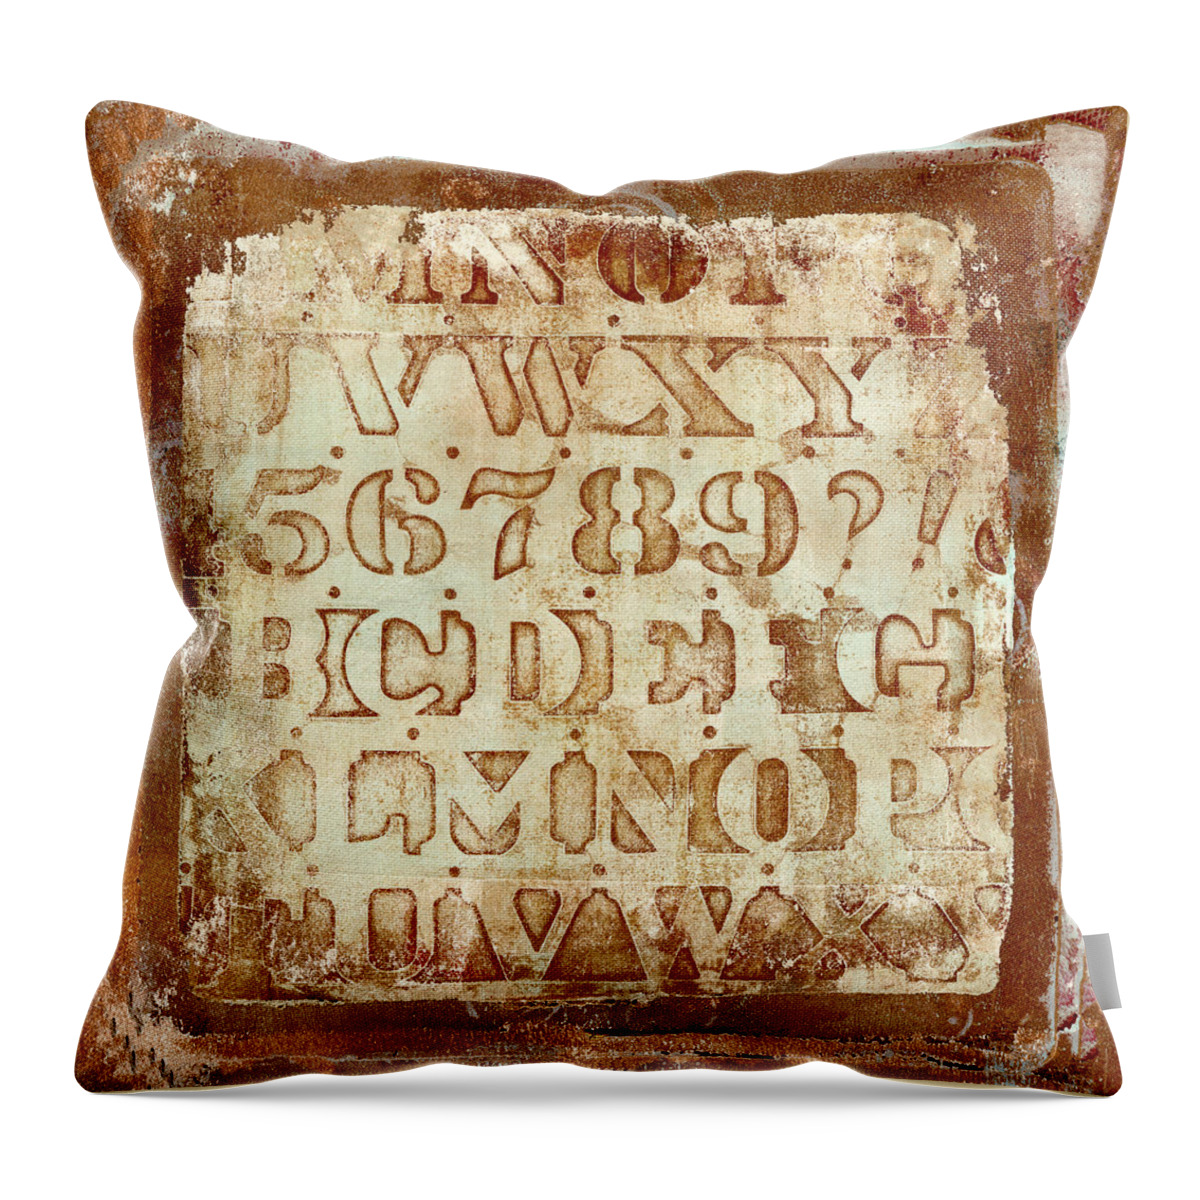 Monoprints Throw Pillow featuring the mixed media Layered Prints by Carol Leigh